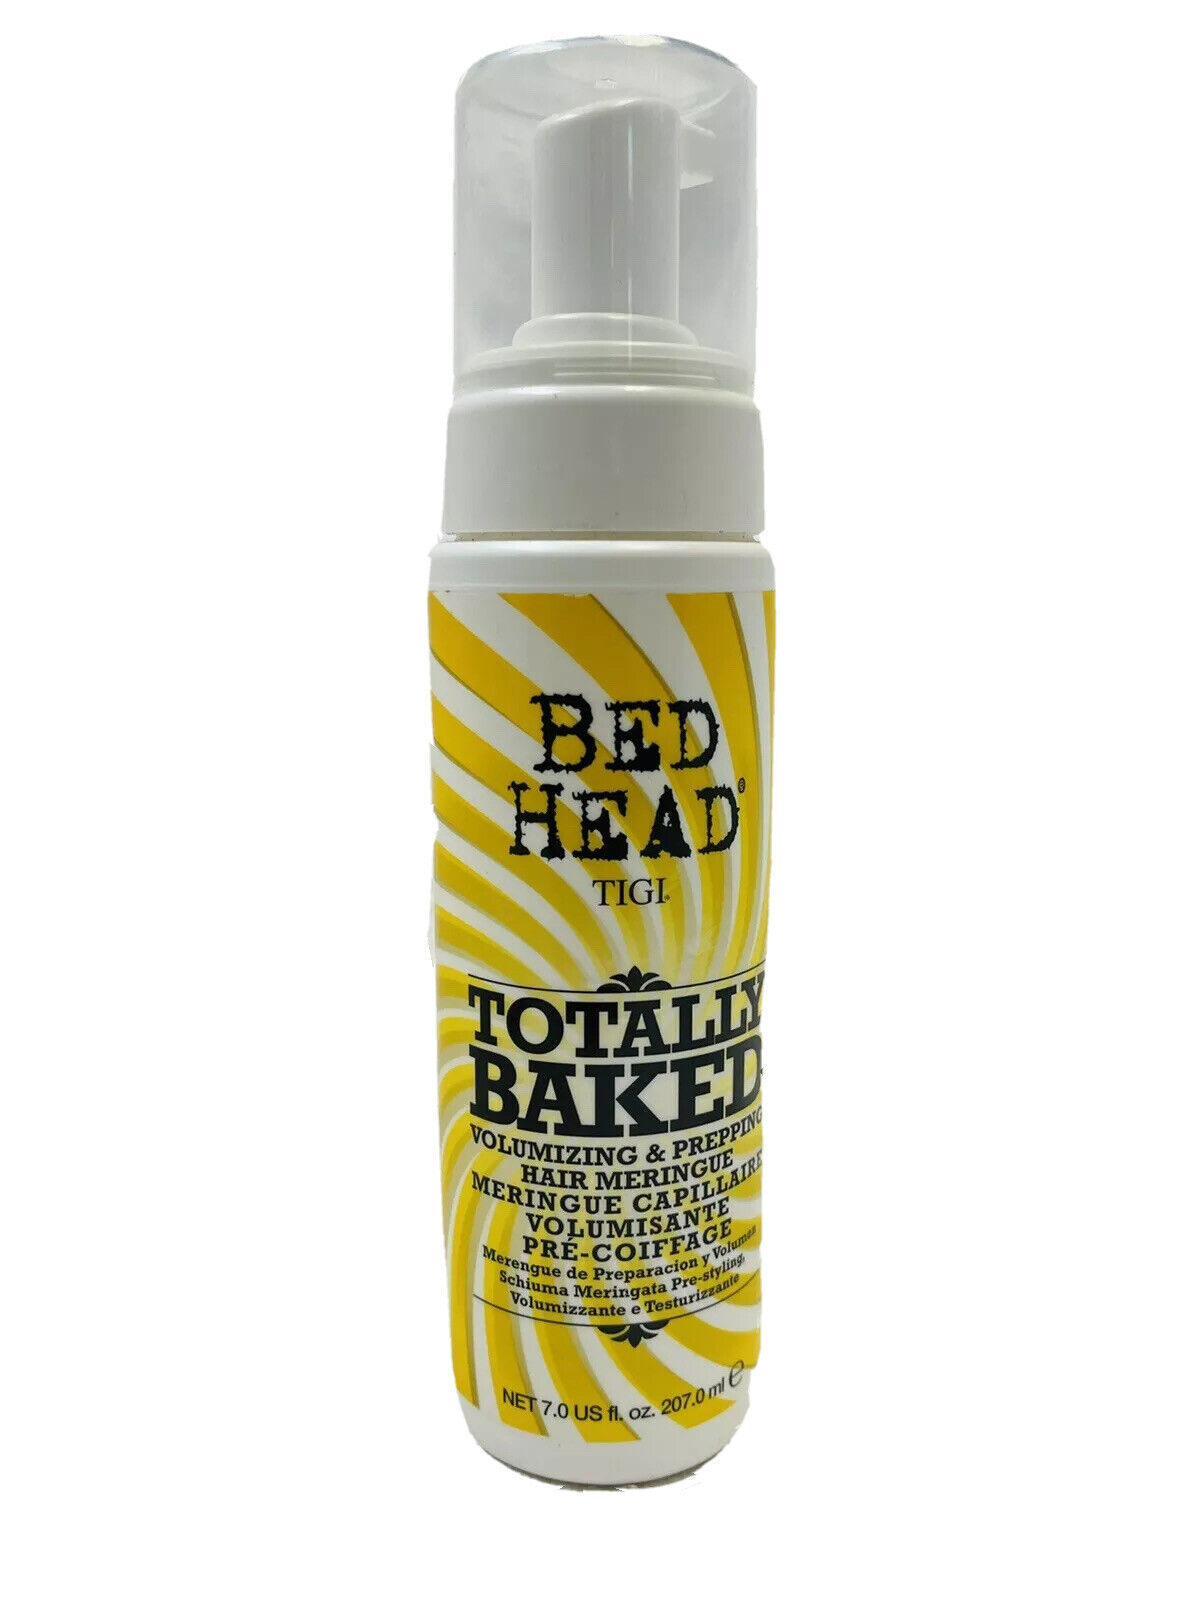 BED HEAD TOTALLY BAKED VOLUMIZING & PREPPING 7oz